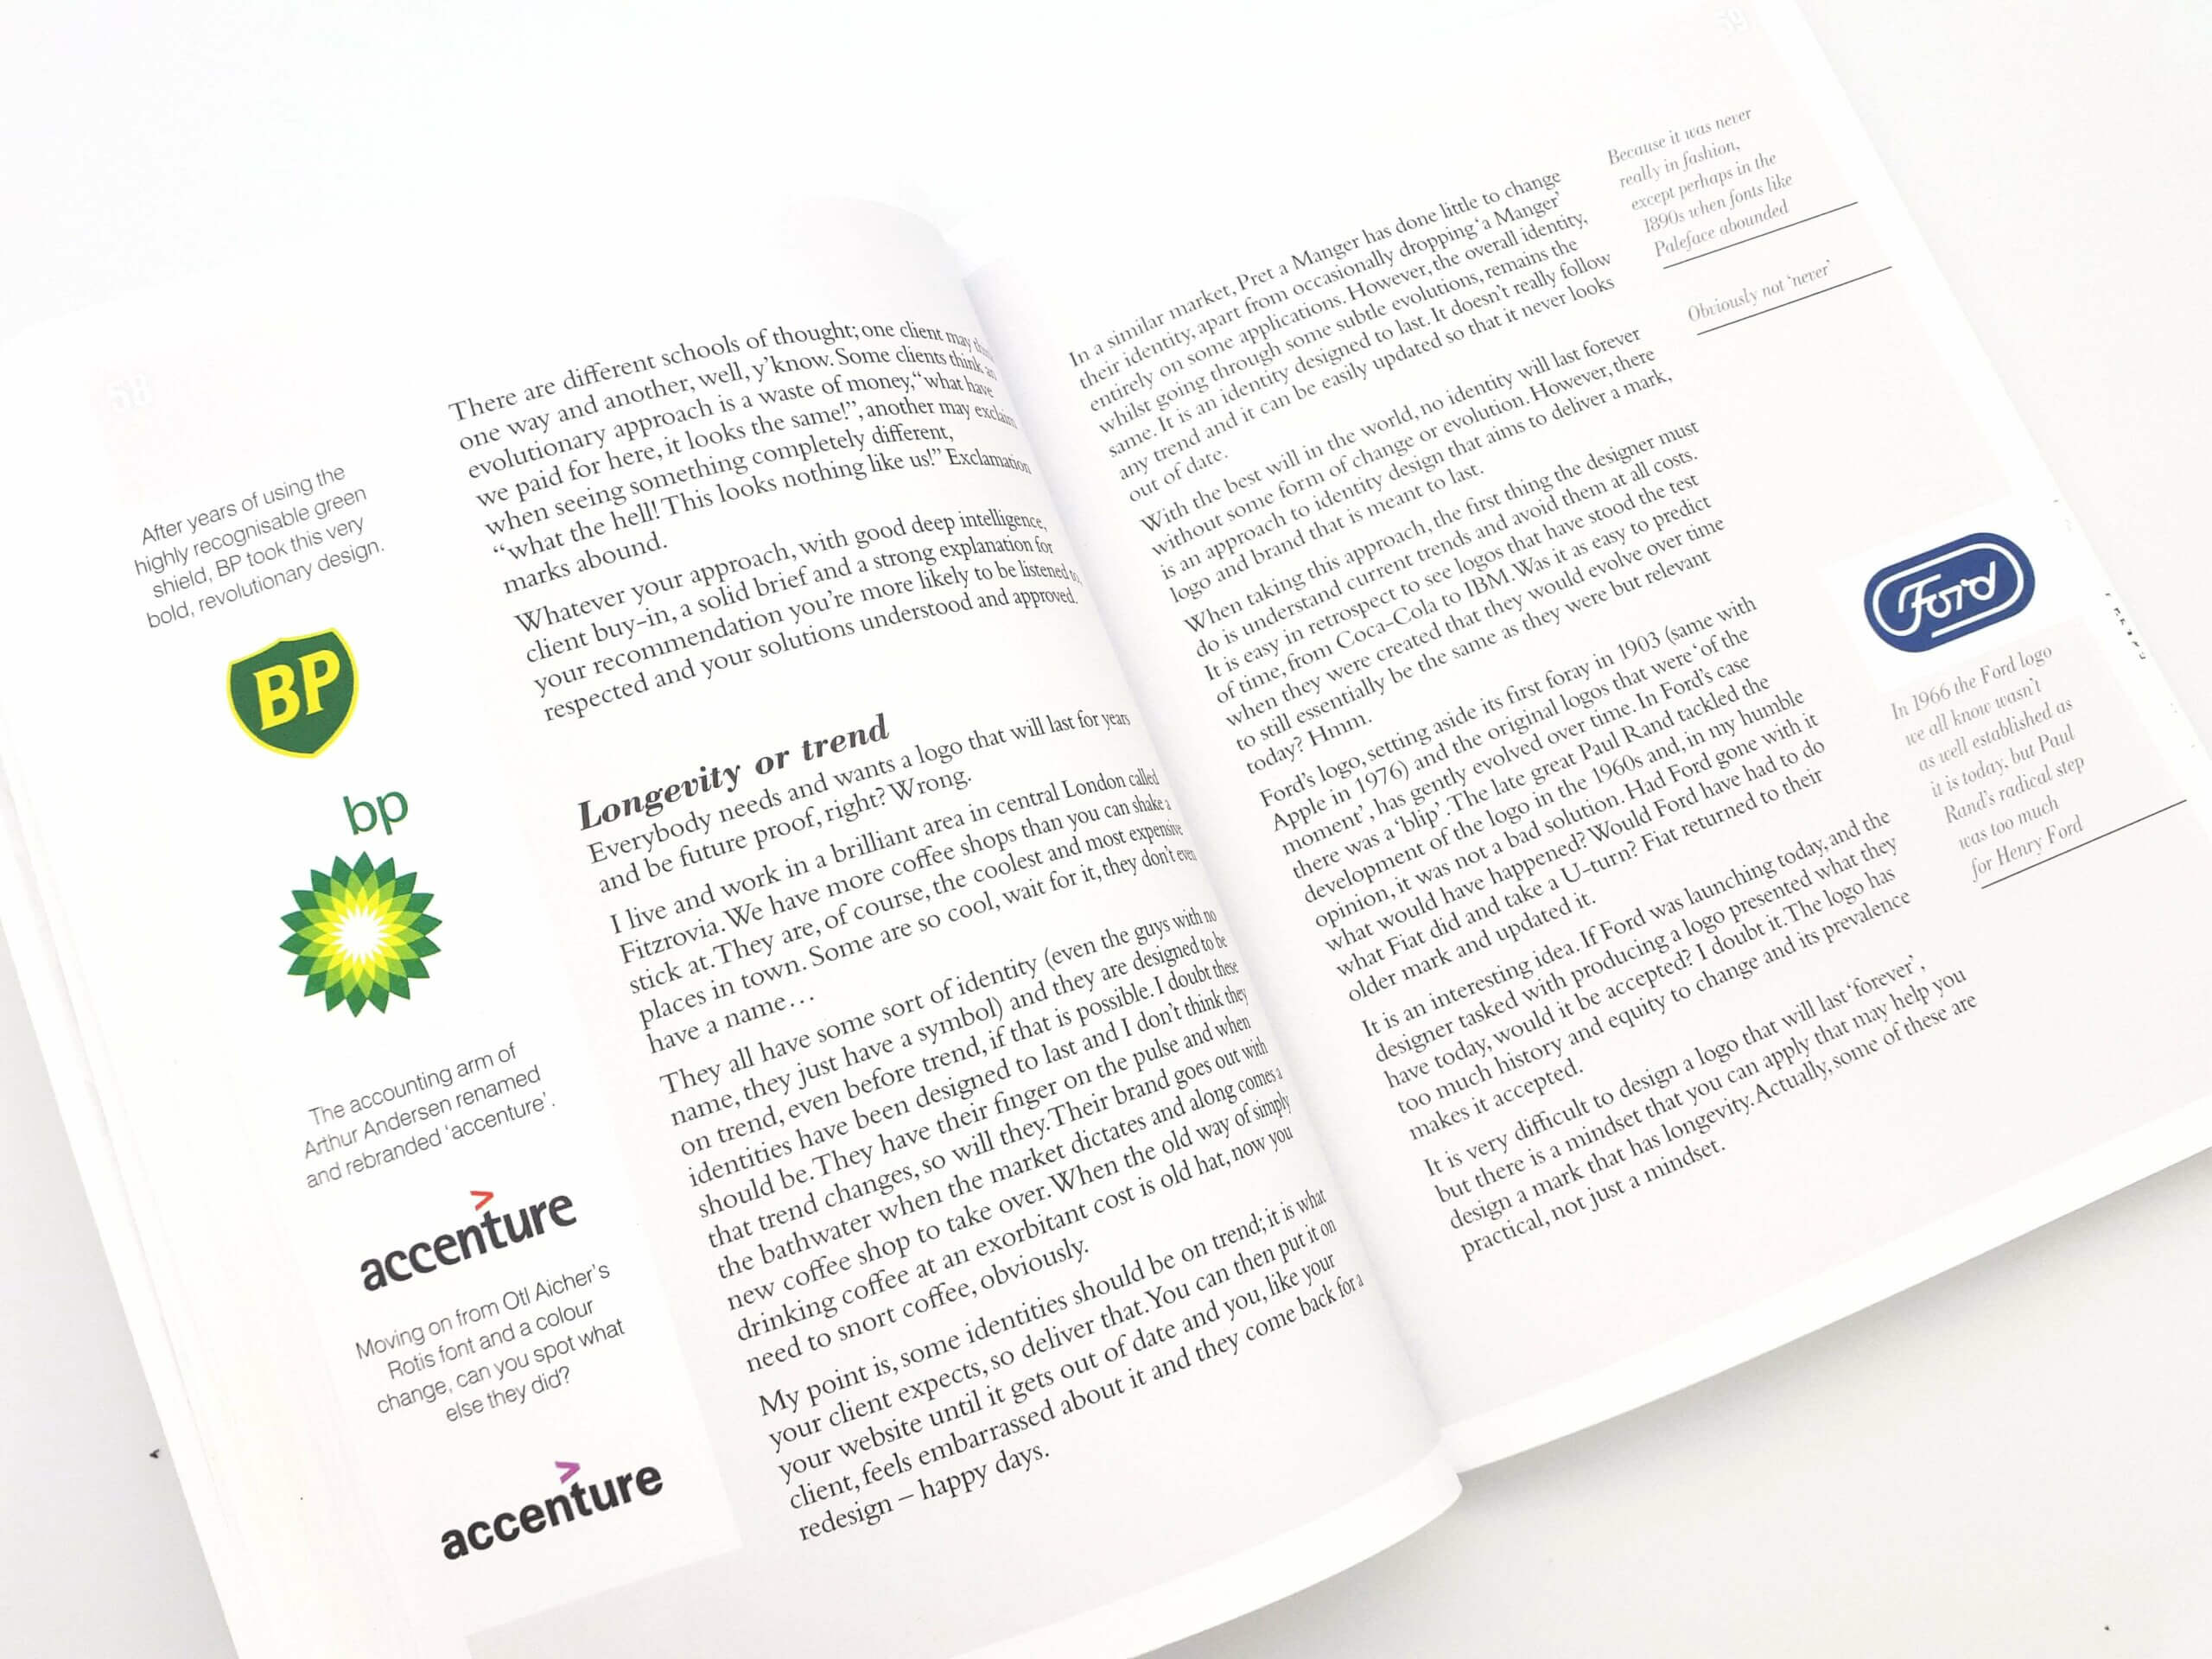 Know Your Onions - Corporate Identity By Drew de Soto - Book Review_5